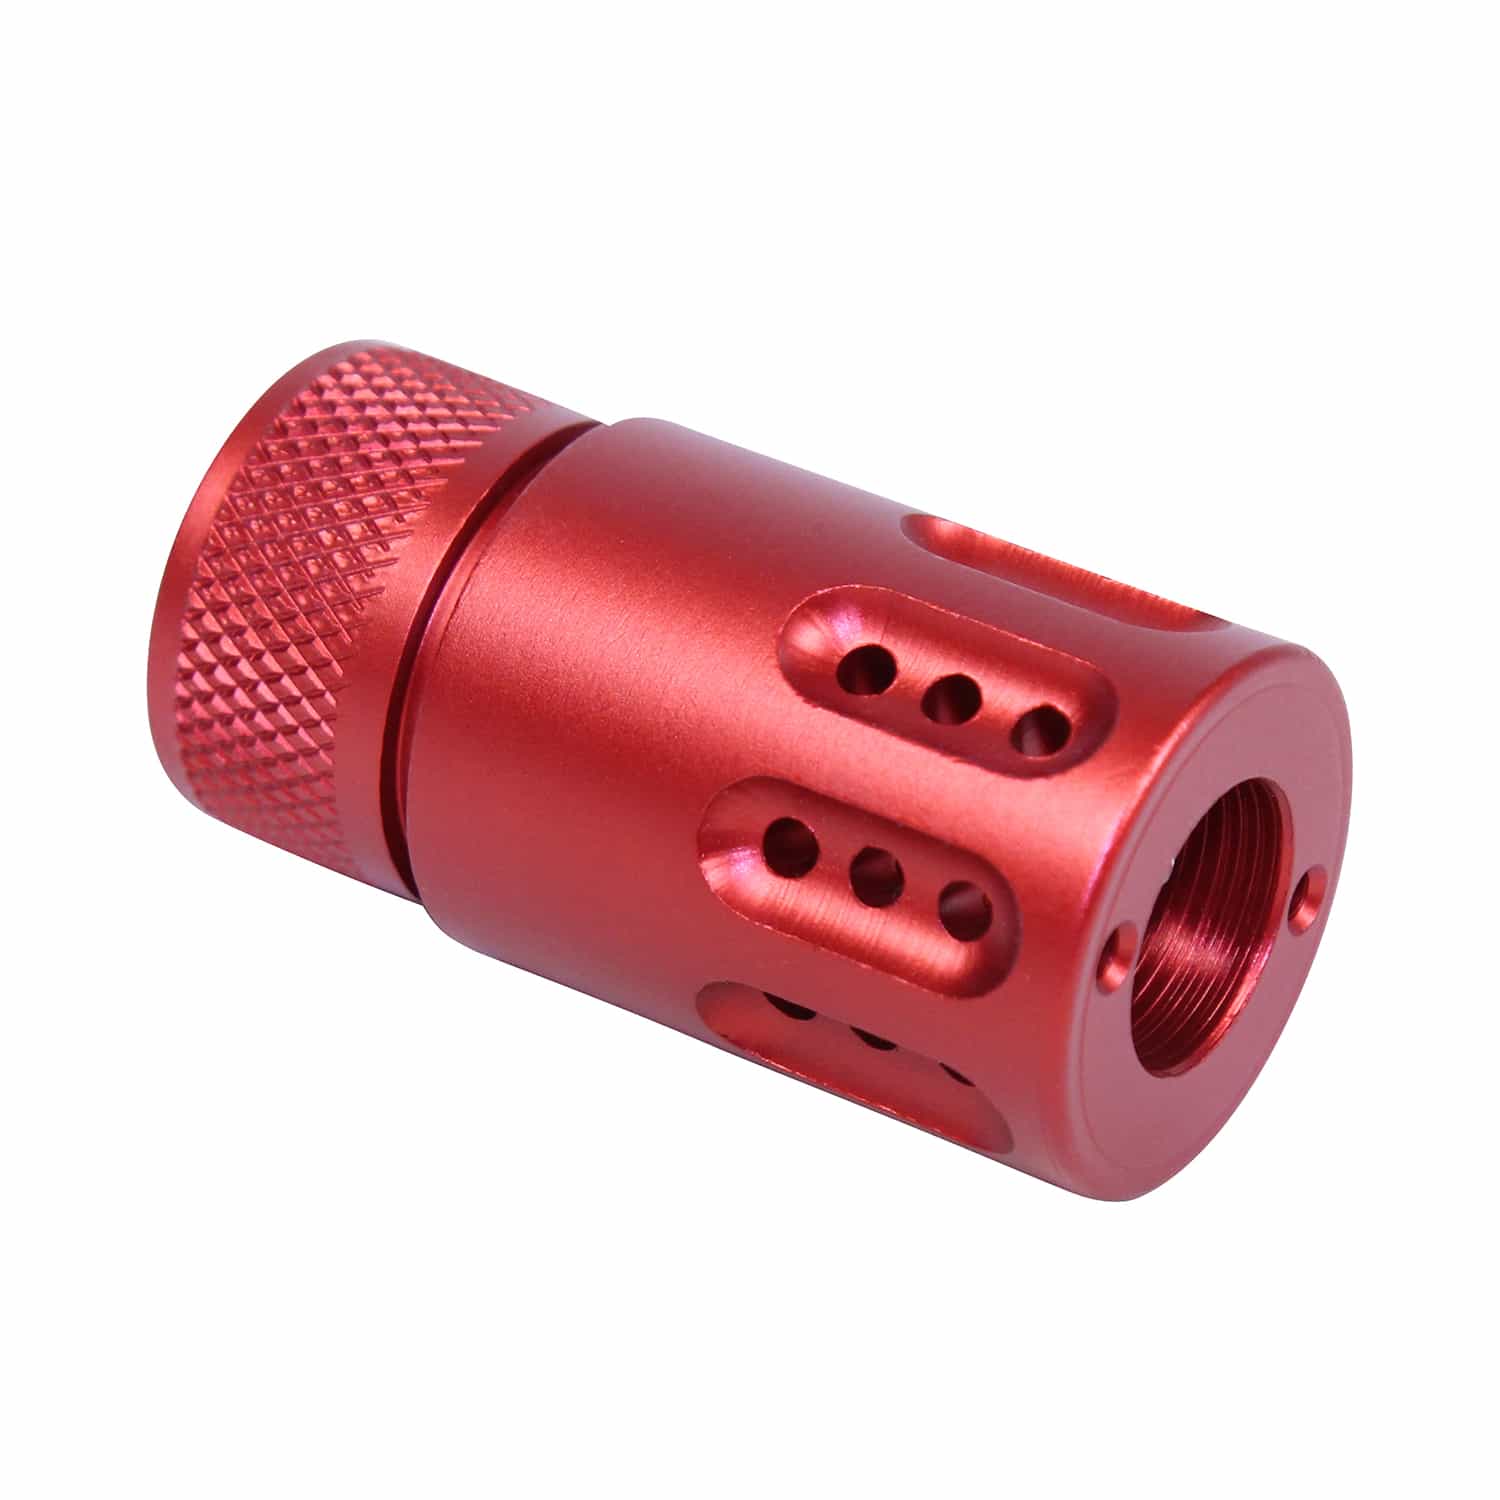 Mini muzzle brake and barrel shroud for AR .308 in anodized red